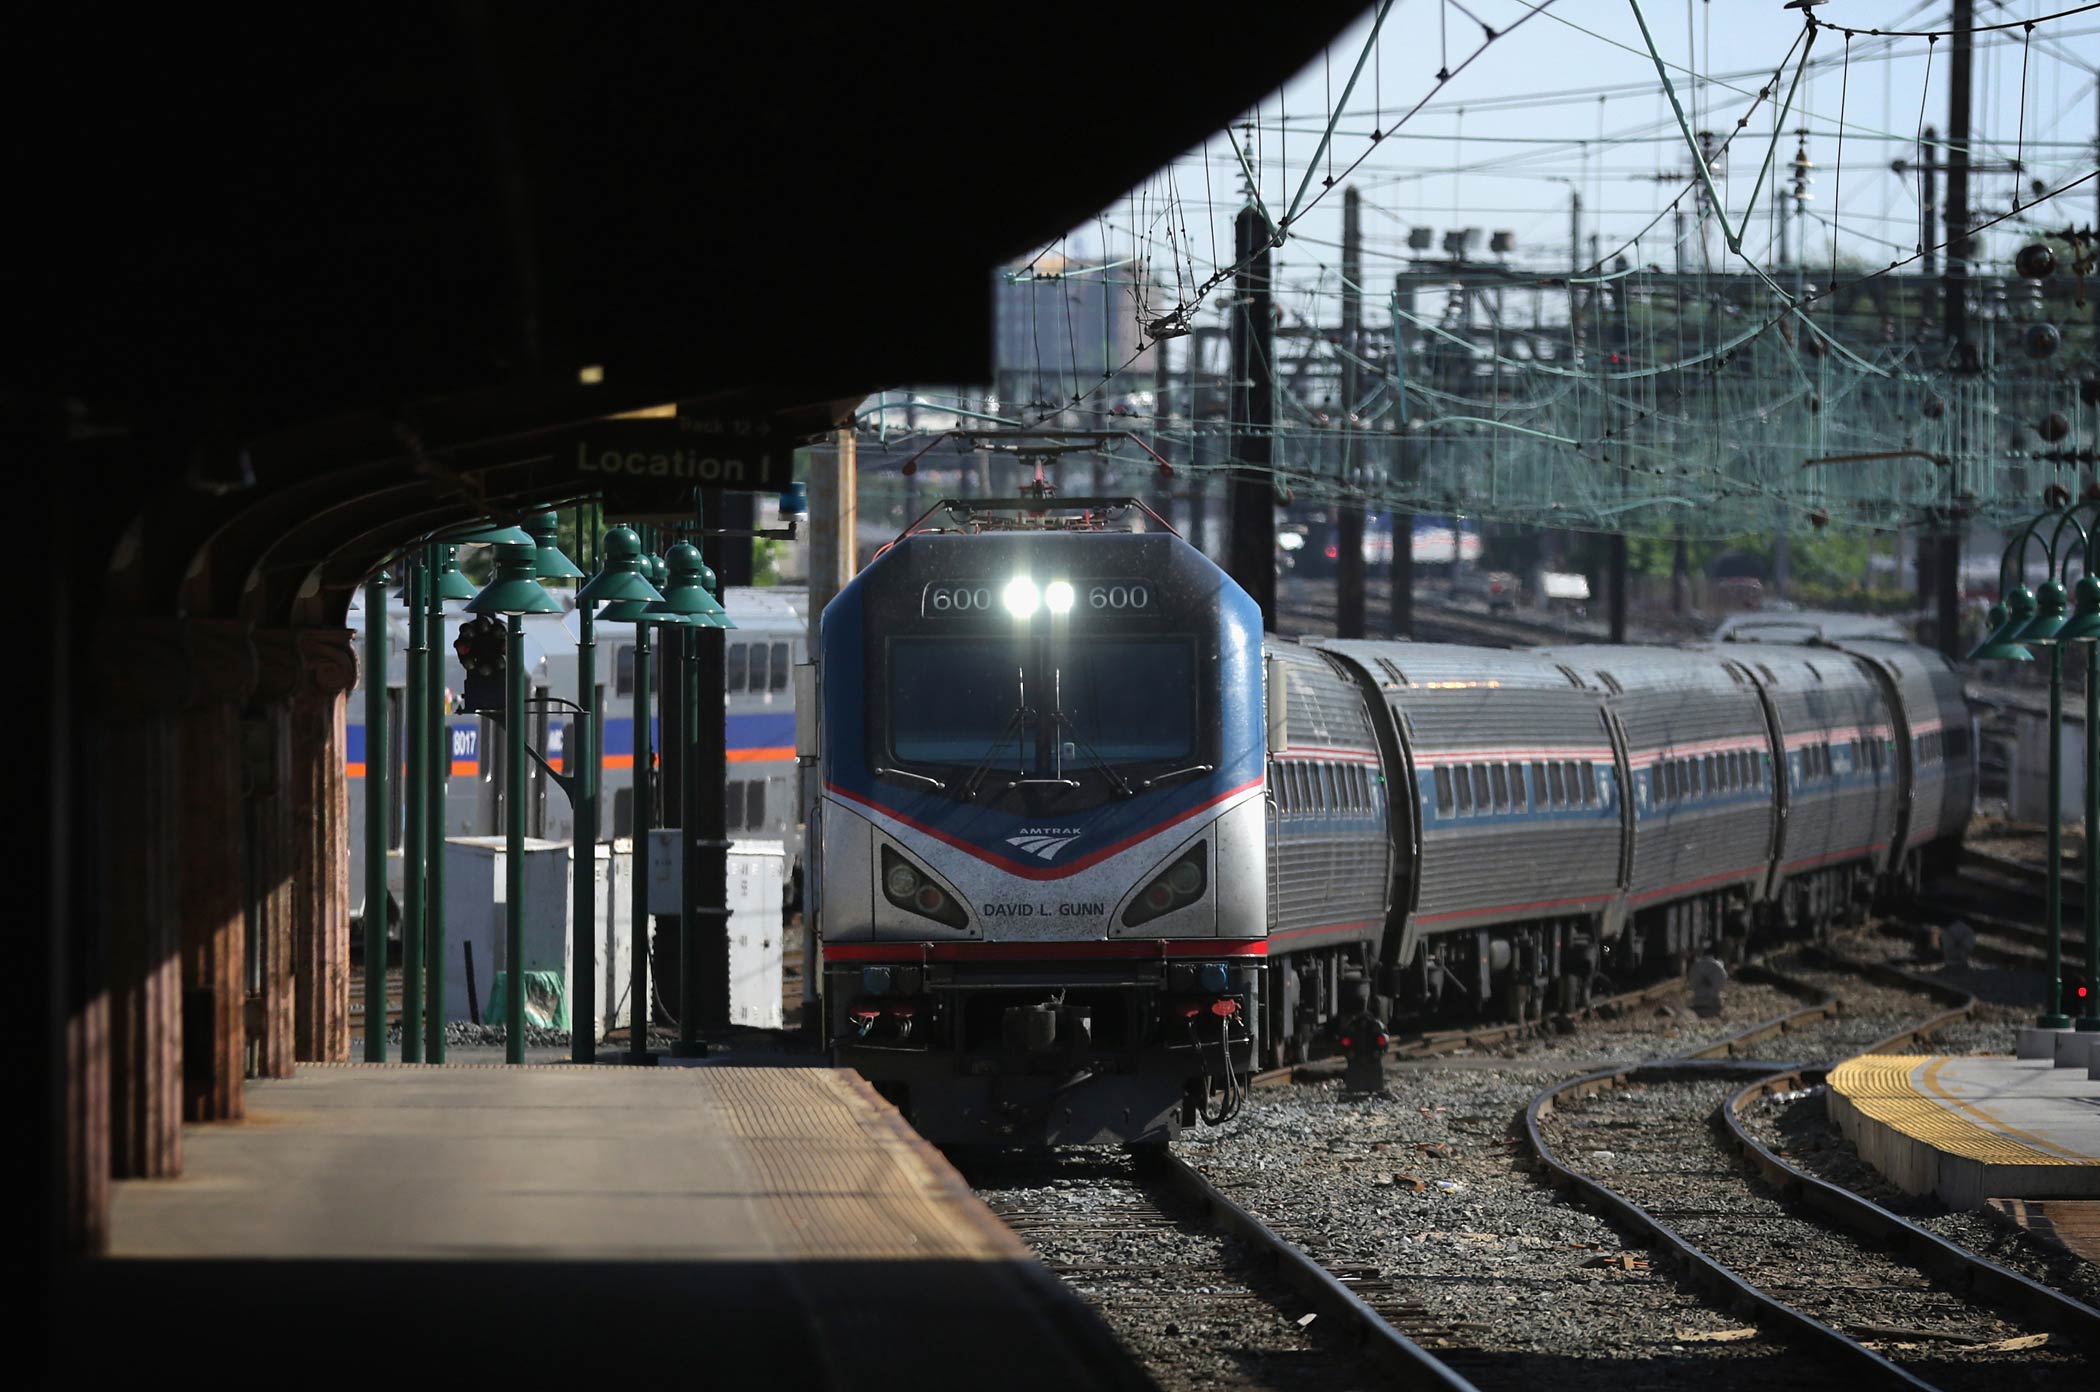 Amtrak Resumes Service On Busy Northeast Corridor After Deadly Train Crash